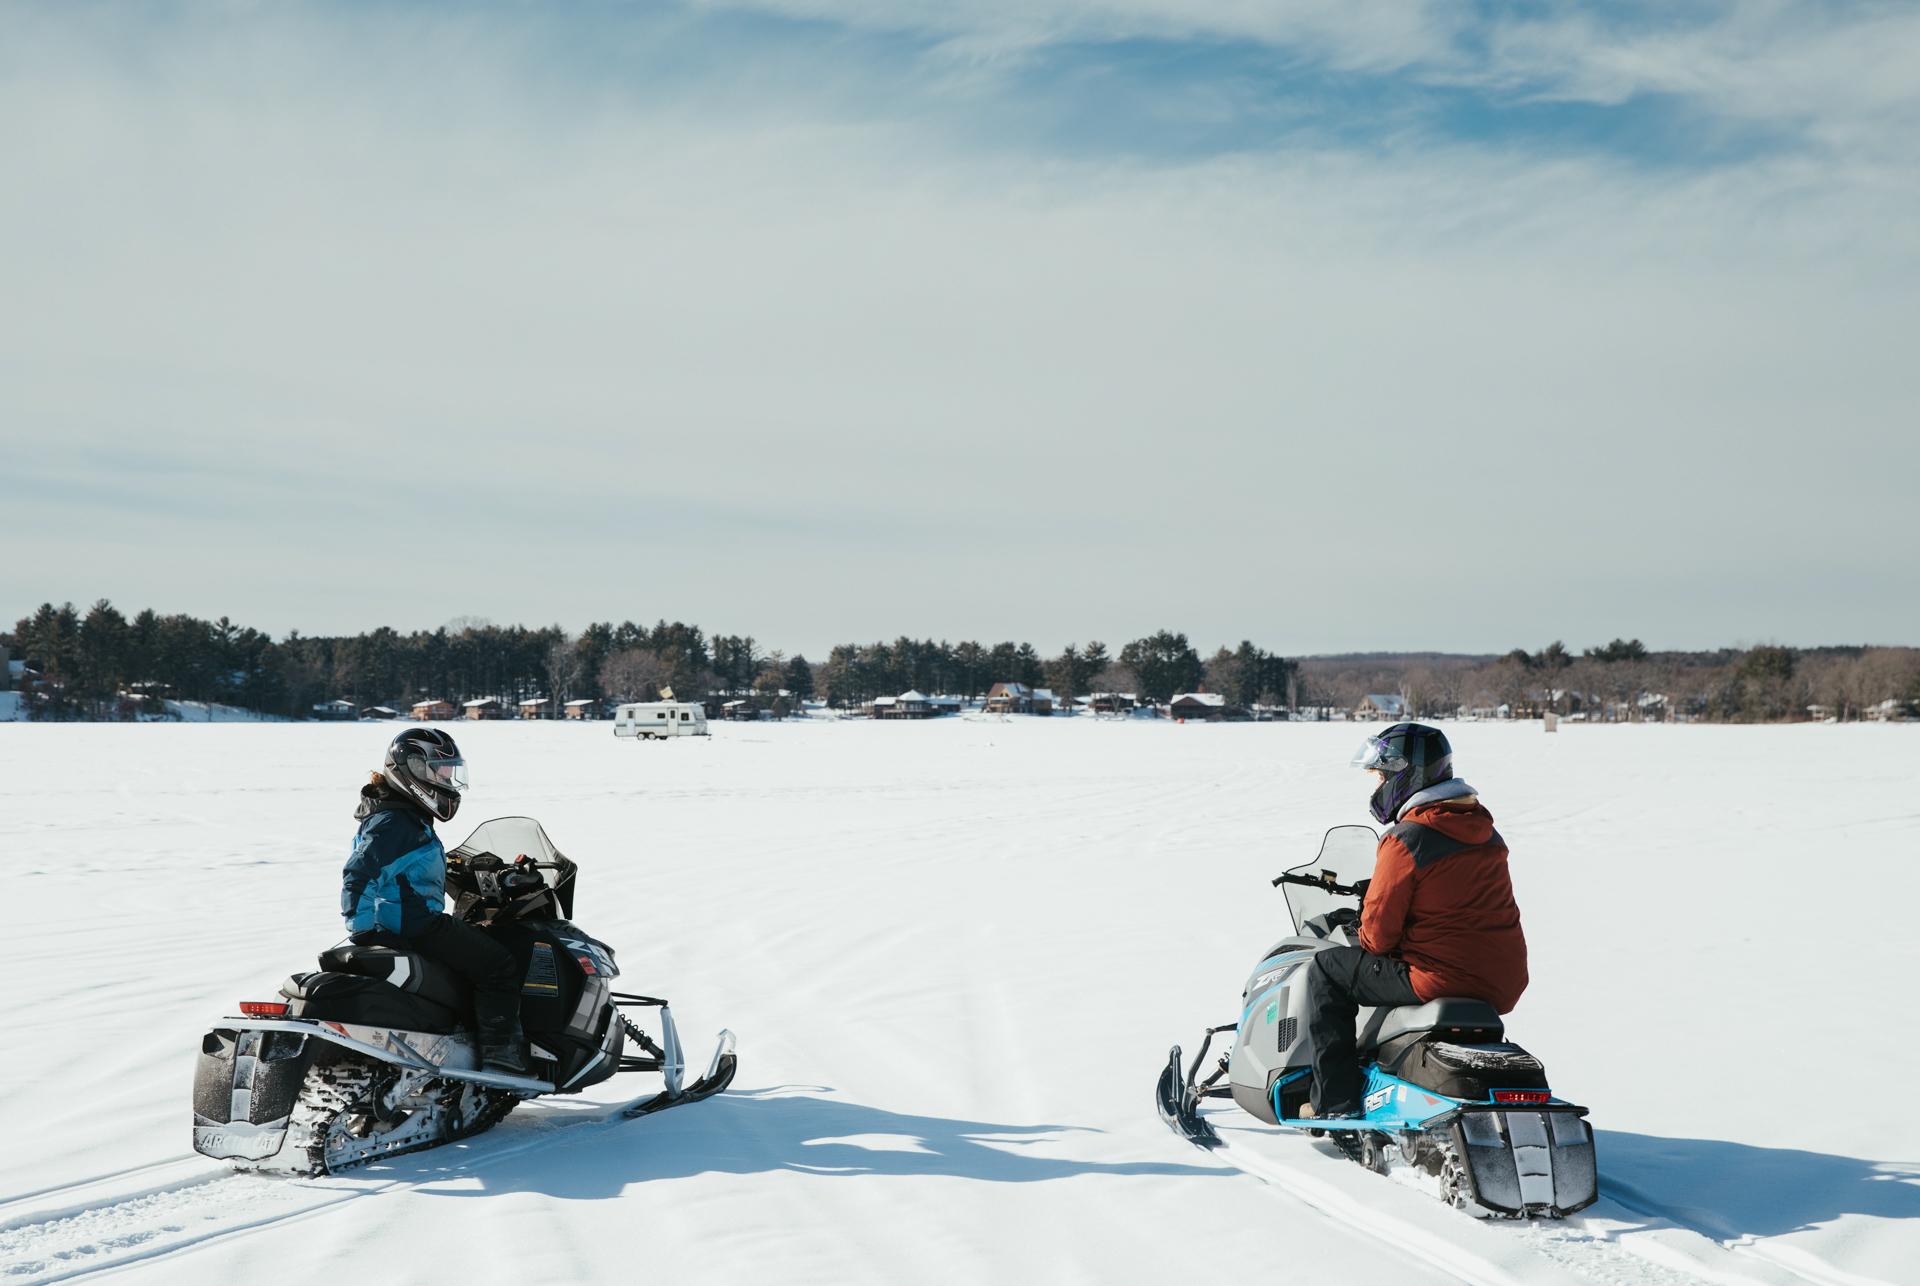 How to get a Swedish snowmobile license